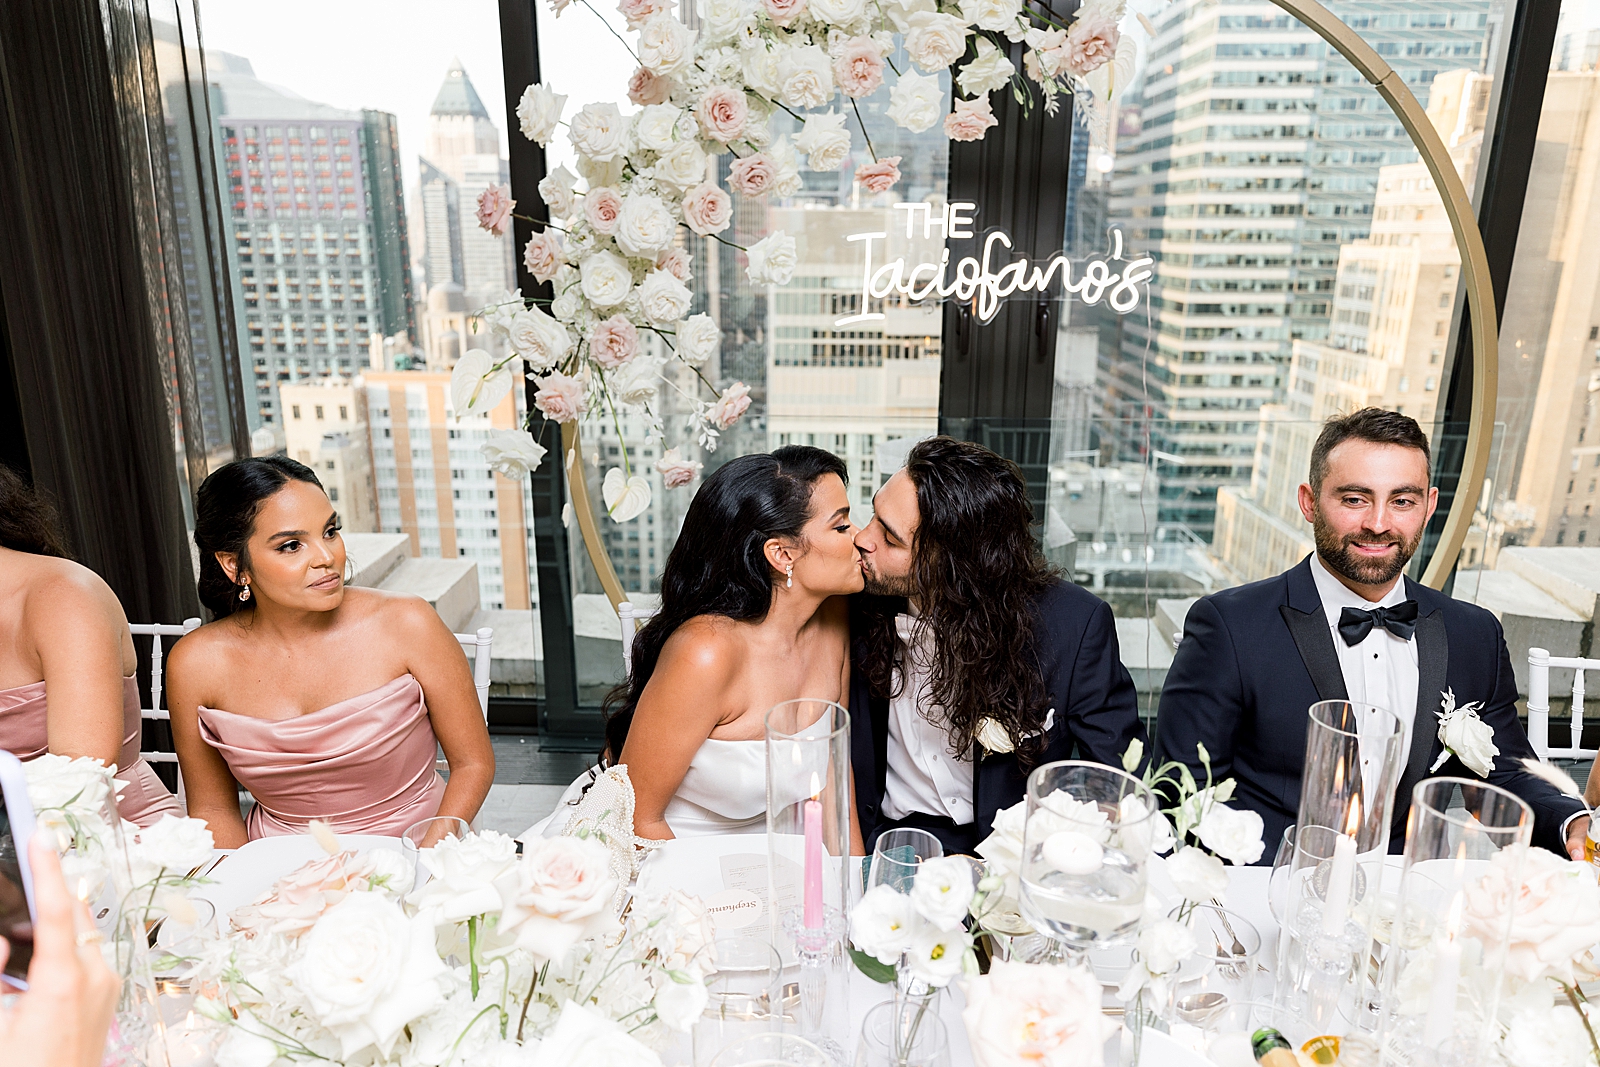 Bride and Groom kissing at wedding party table with Maid of Honor and Best man next to them